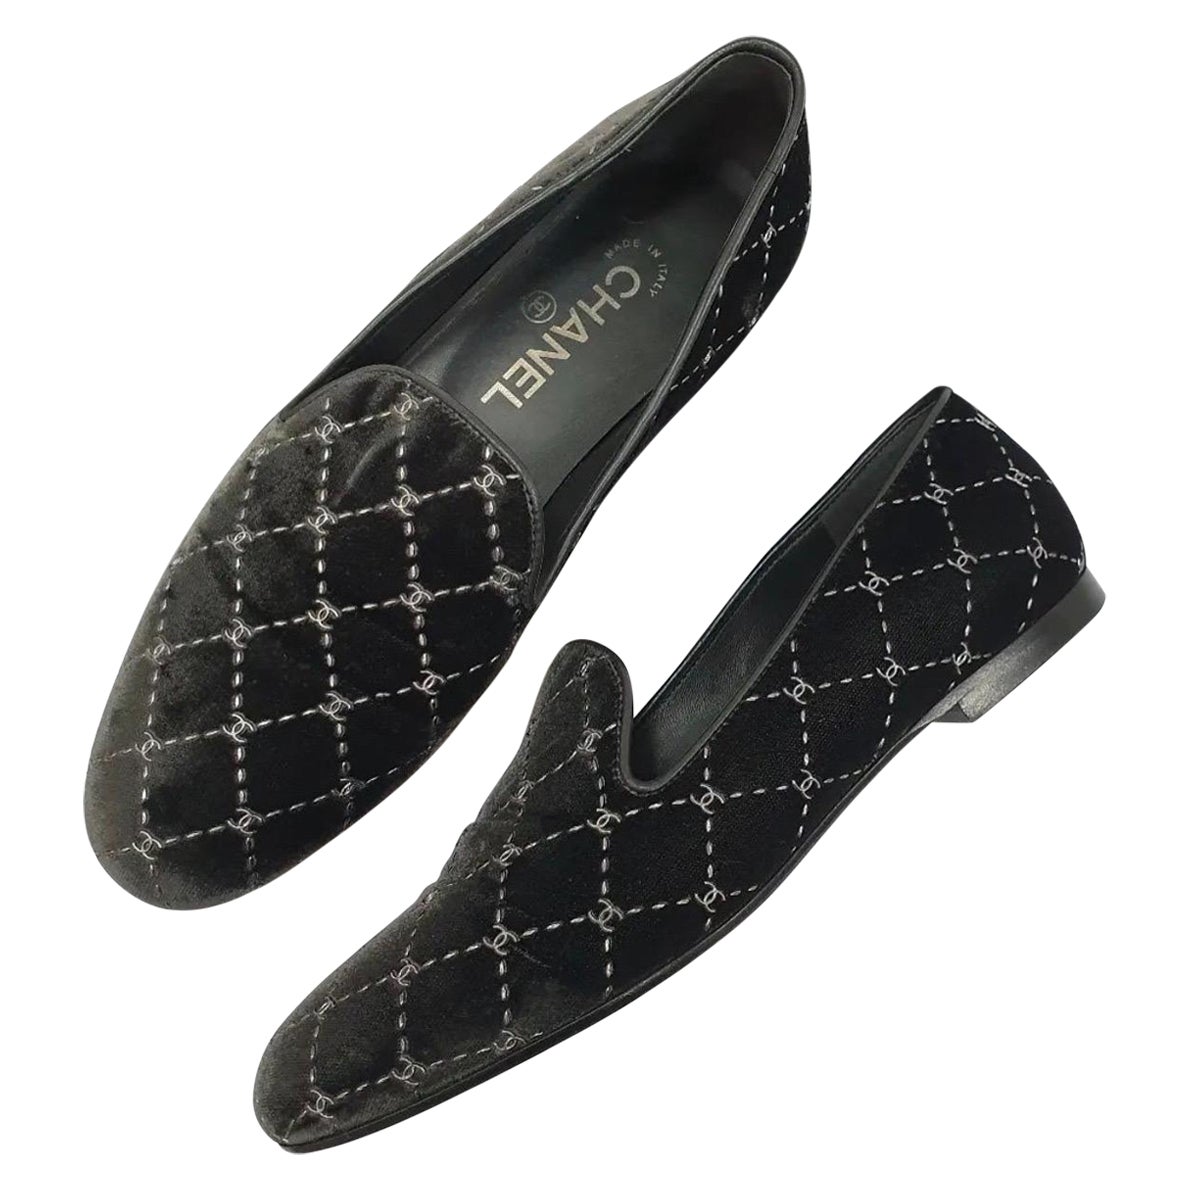 CHANEL Women's Loafer for sale